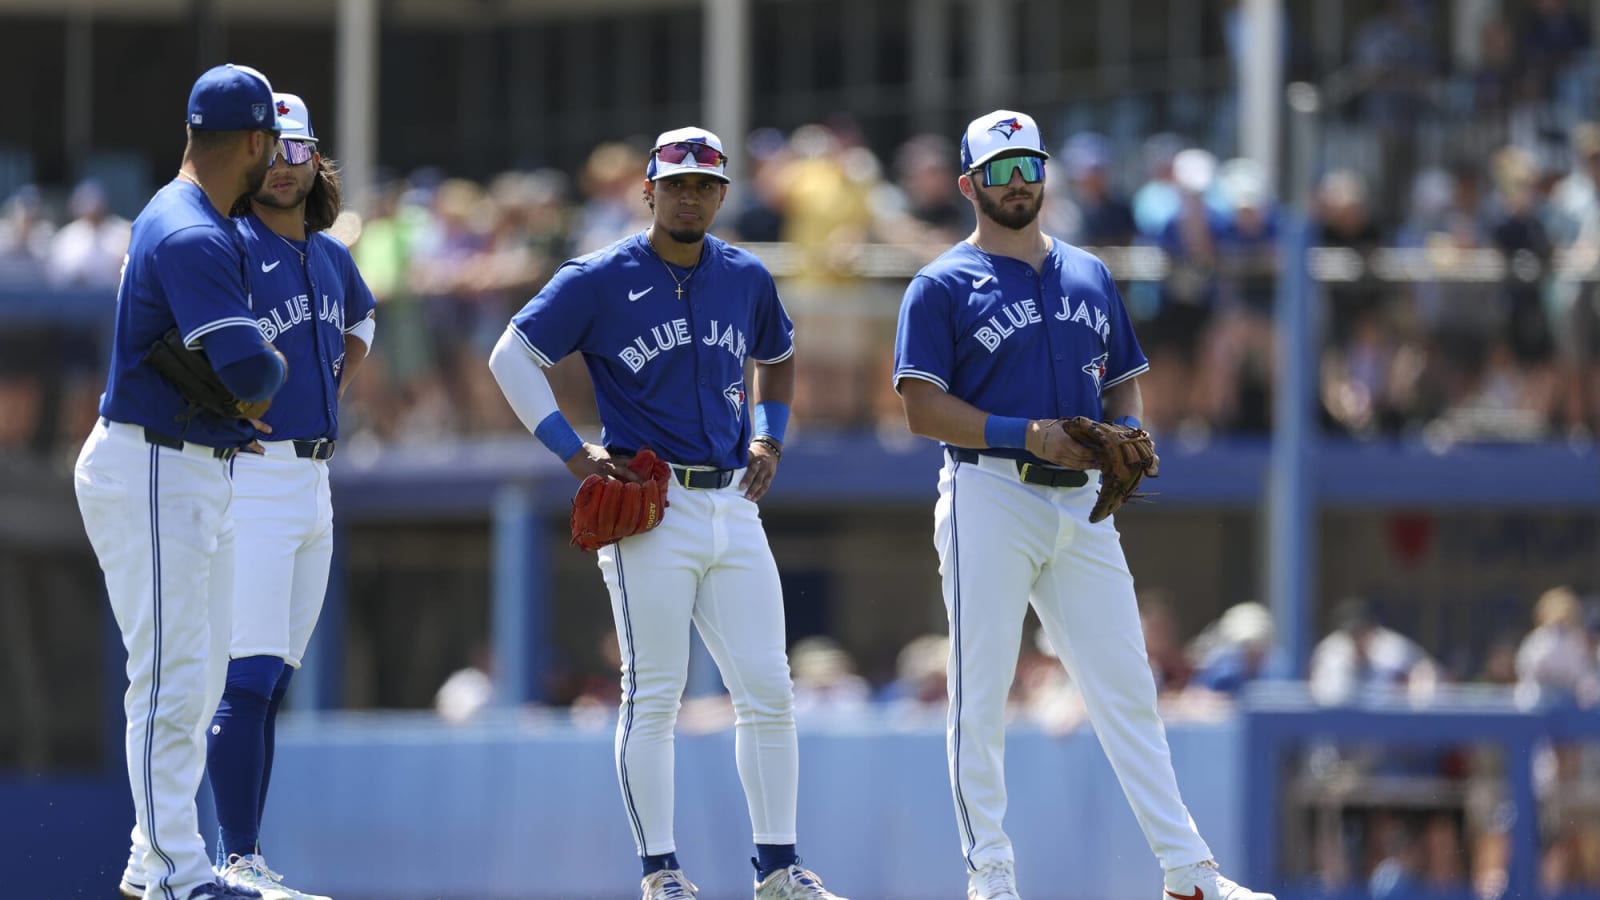 Blue Jays Prospects lost 9-1 to the New York Yankee prospects in the first Spring Breakout game